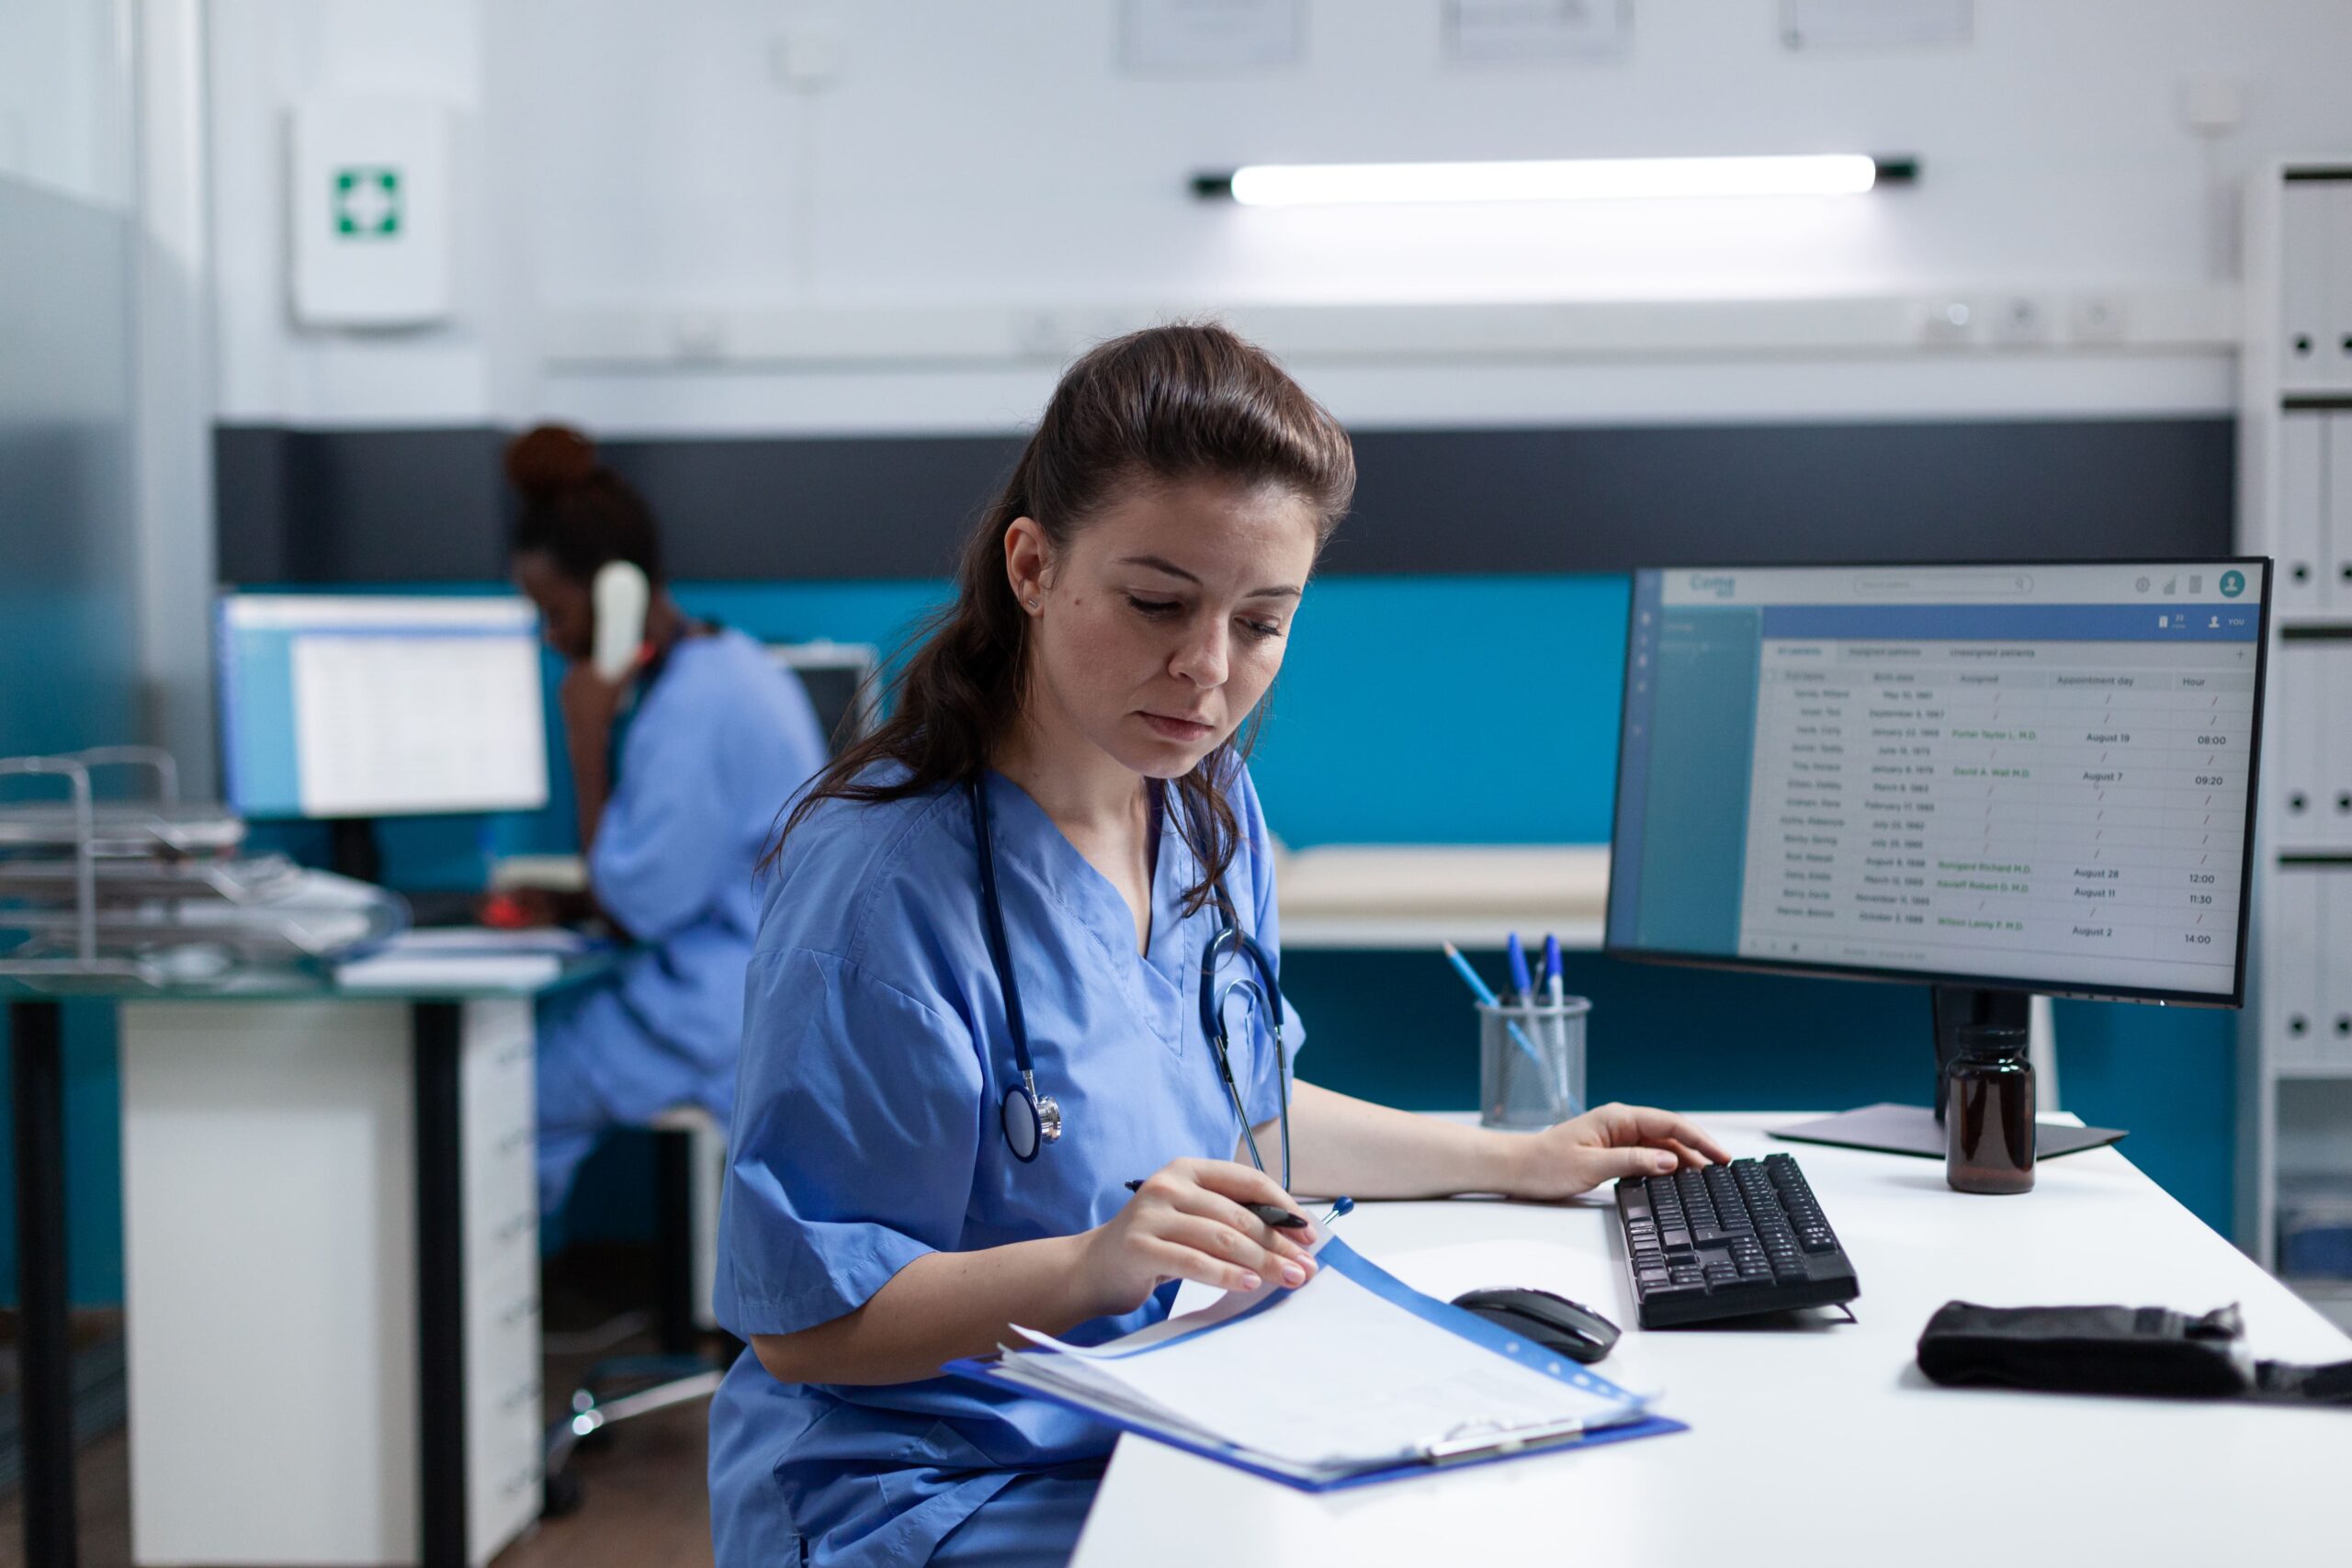 Nursing assignment help services in UK